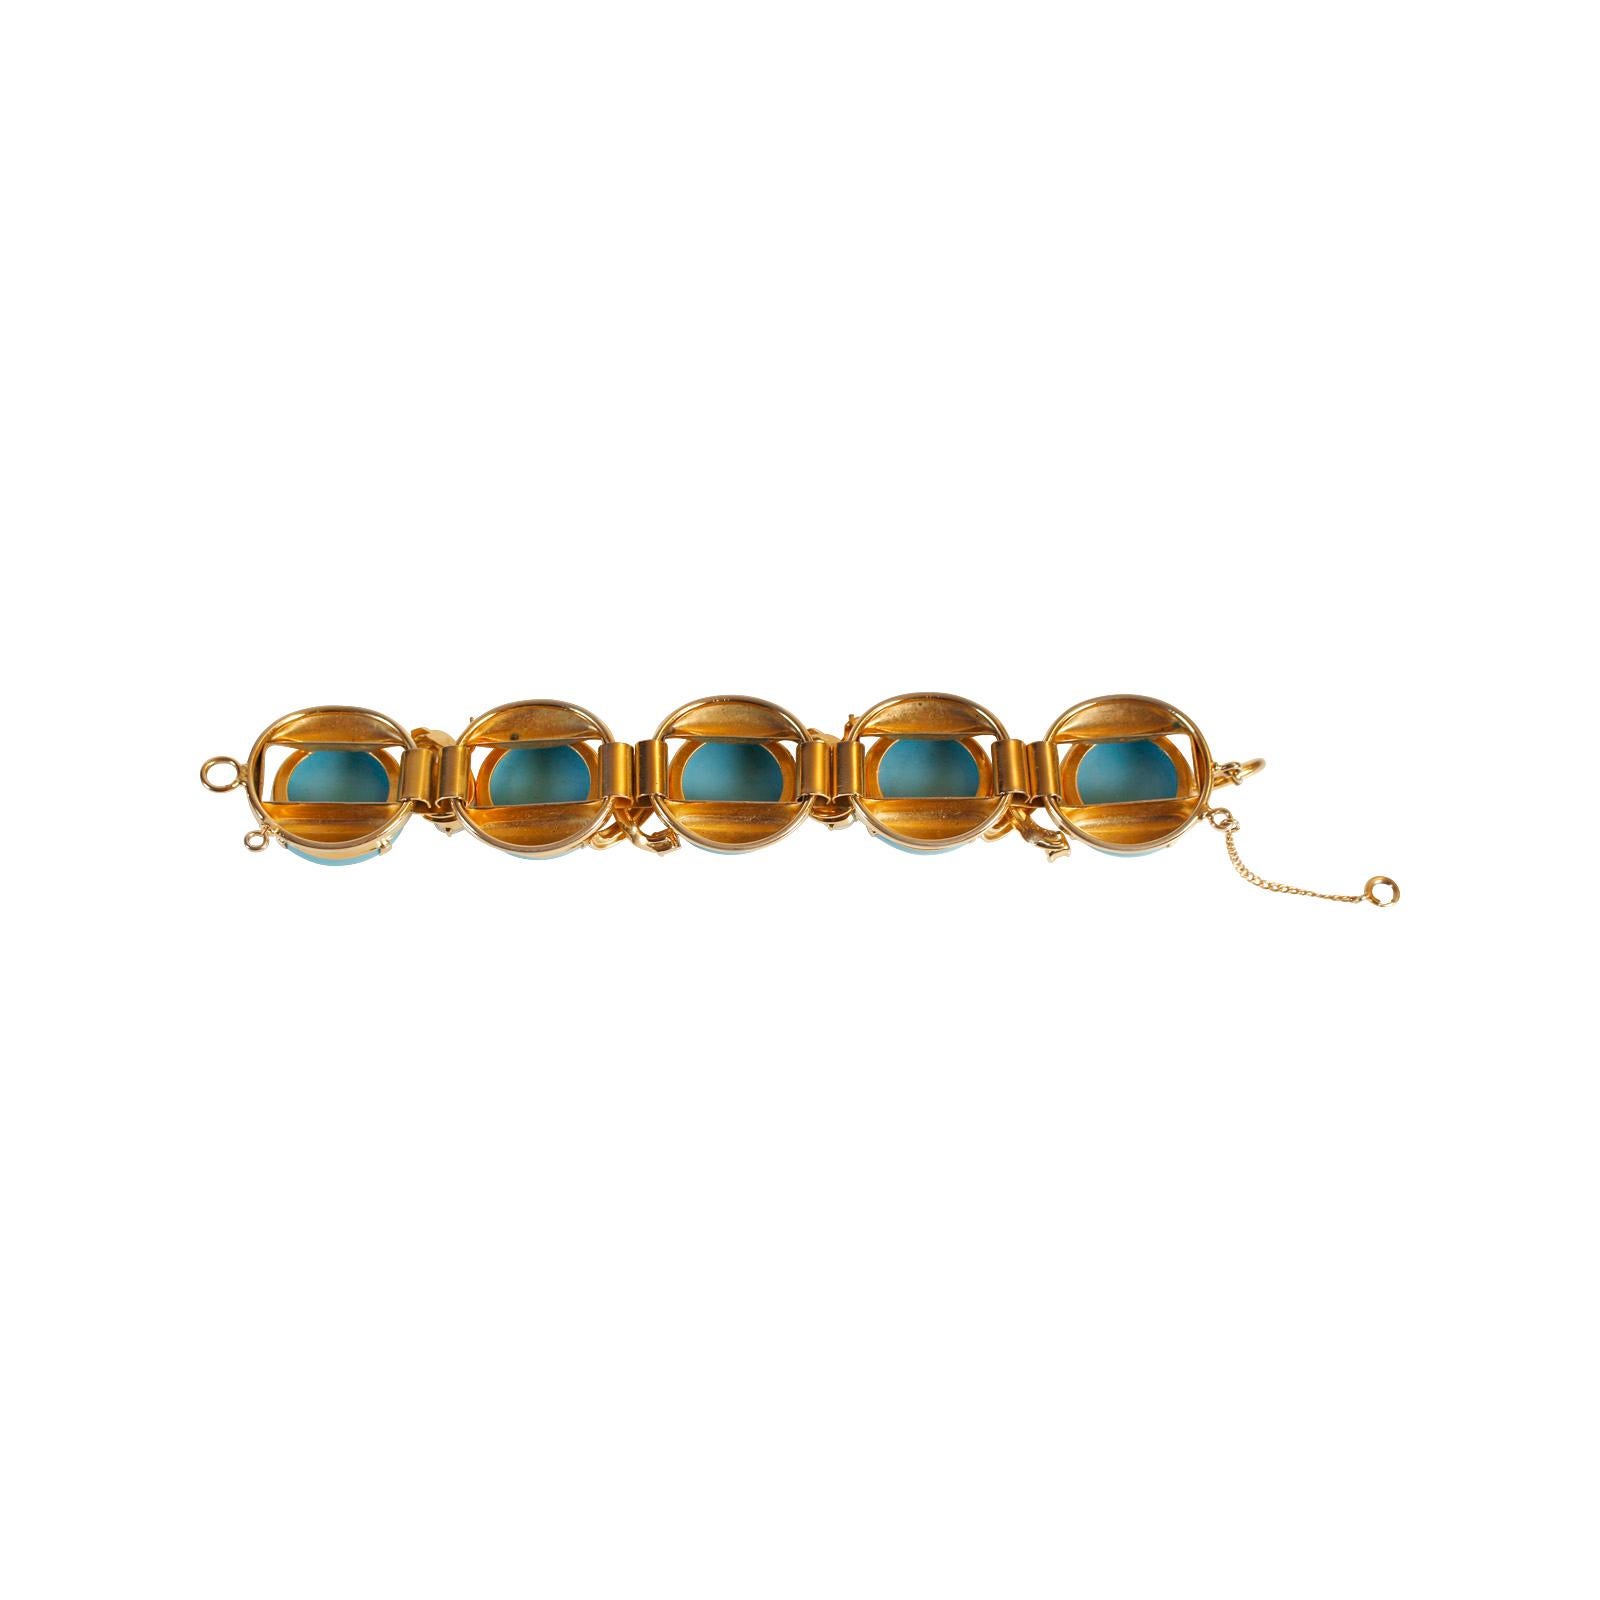 Vintage Unsigned Gold and Faux Turquoise Bracelet Circa 1960s For Sale 8